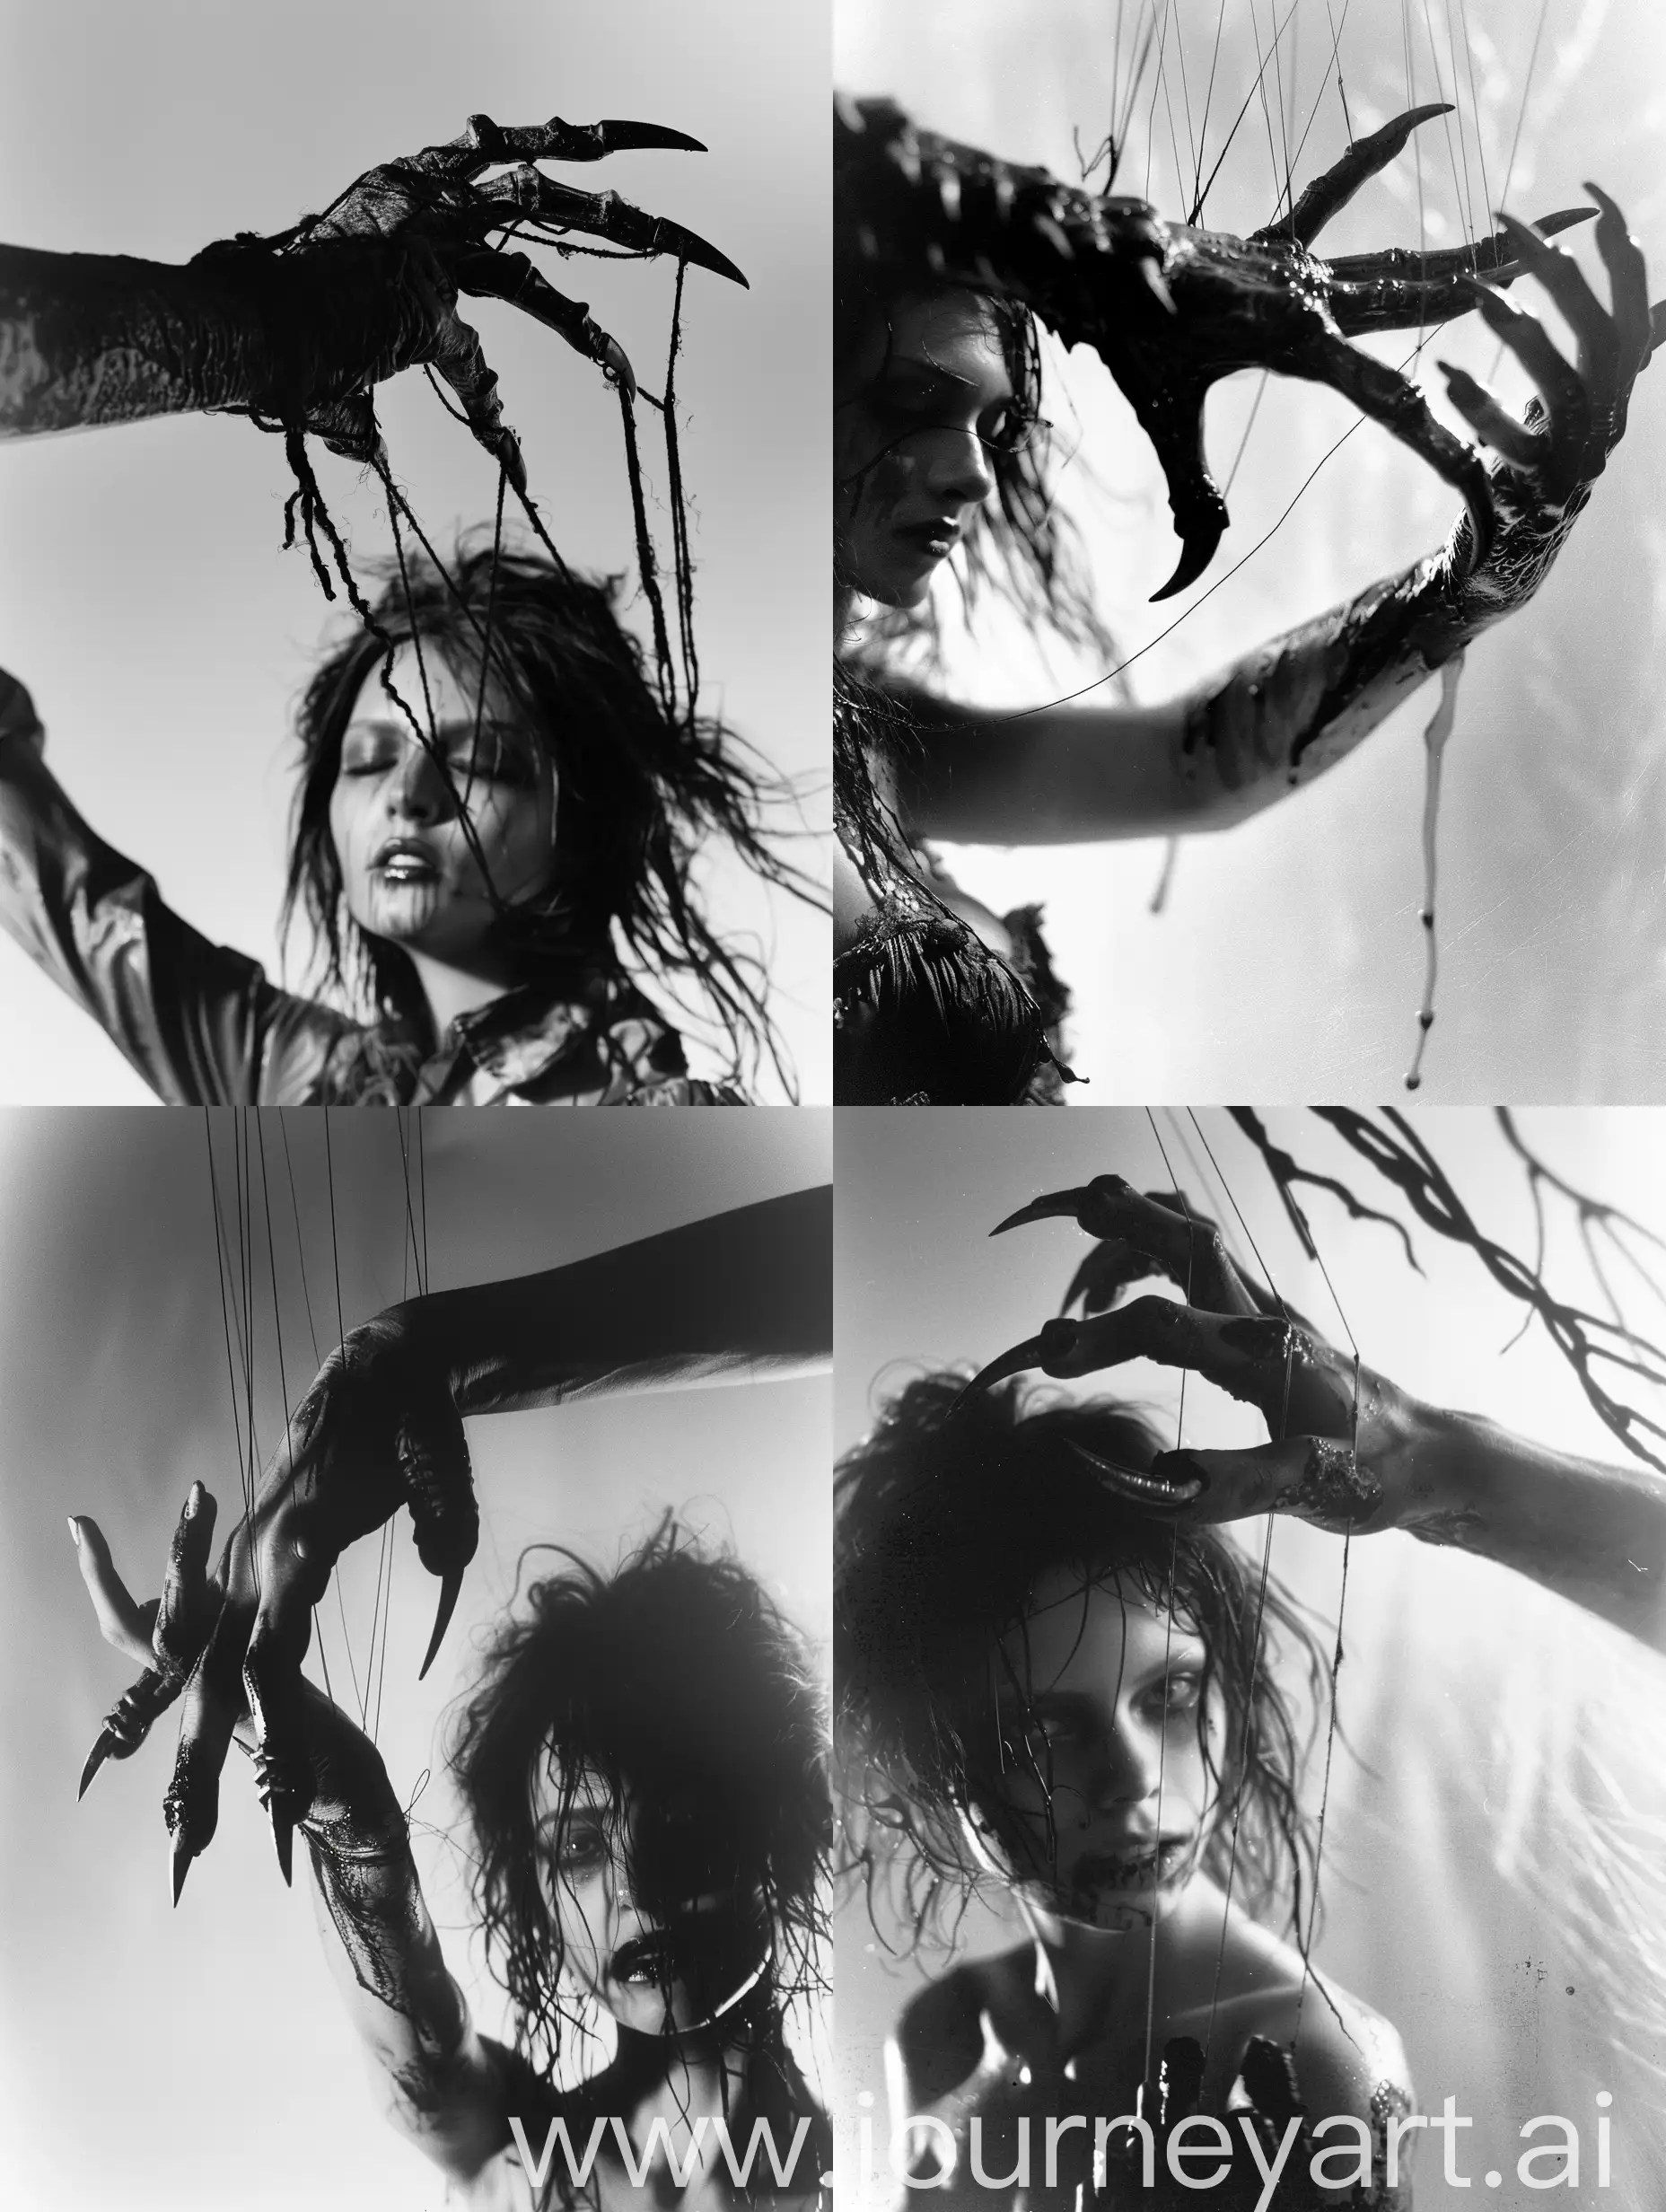 Image of a creepy, sharp clawed hand with puppet strings around the fingers, the end of the strings are attached to the arms and legs of a beautiful young woman being controlled like a marionette puppet. The woman looks unhinged and has messy dark hair and makeup smeared all over her face.  bathed in dim, flickering light, grayscale, white background, expired 35mm film